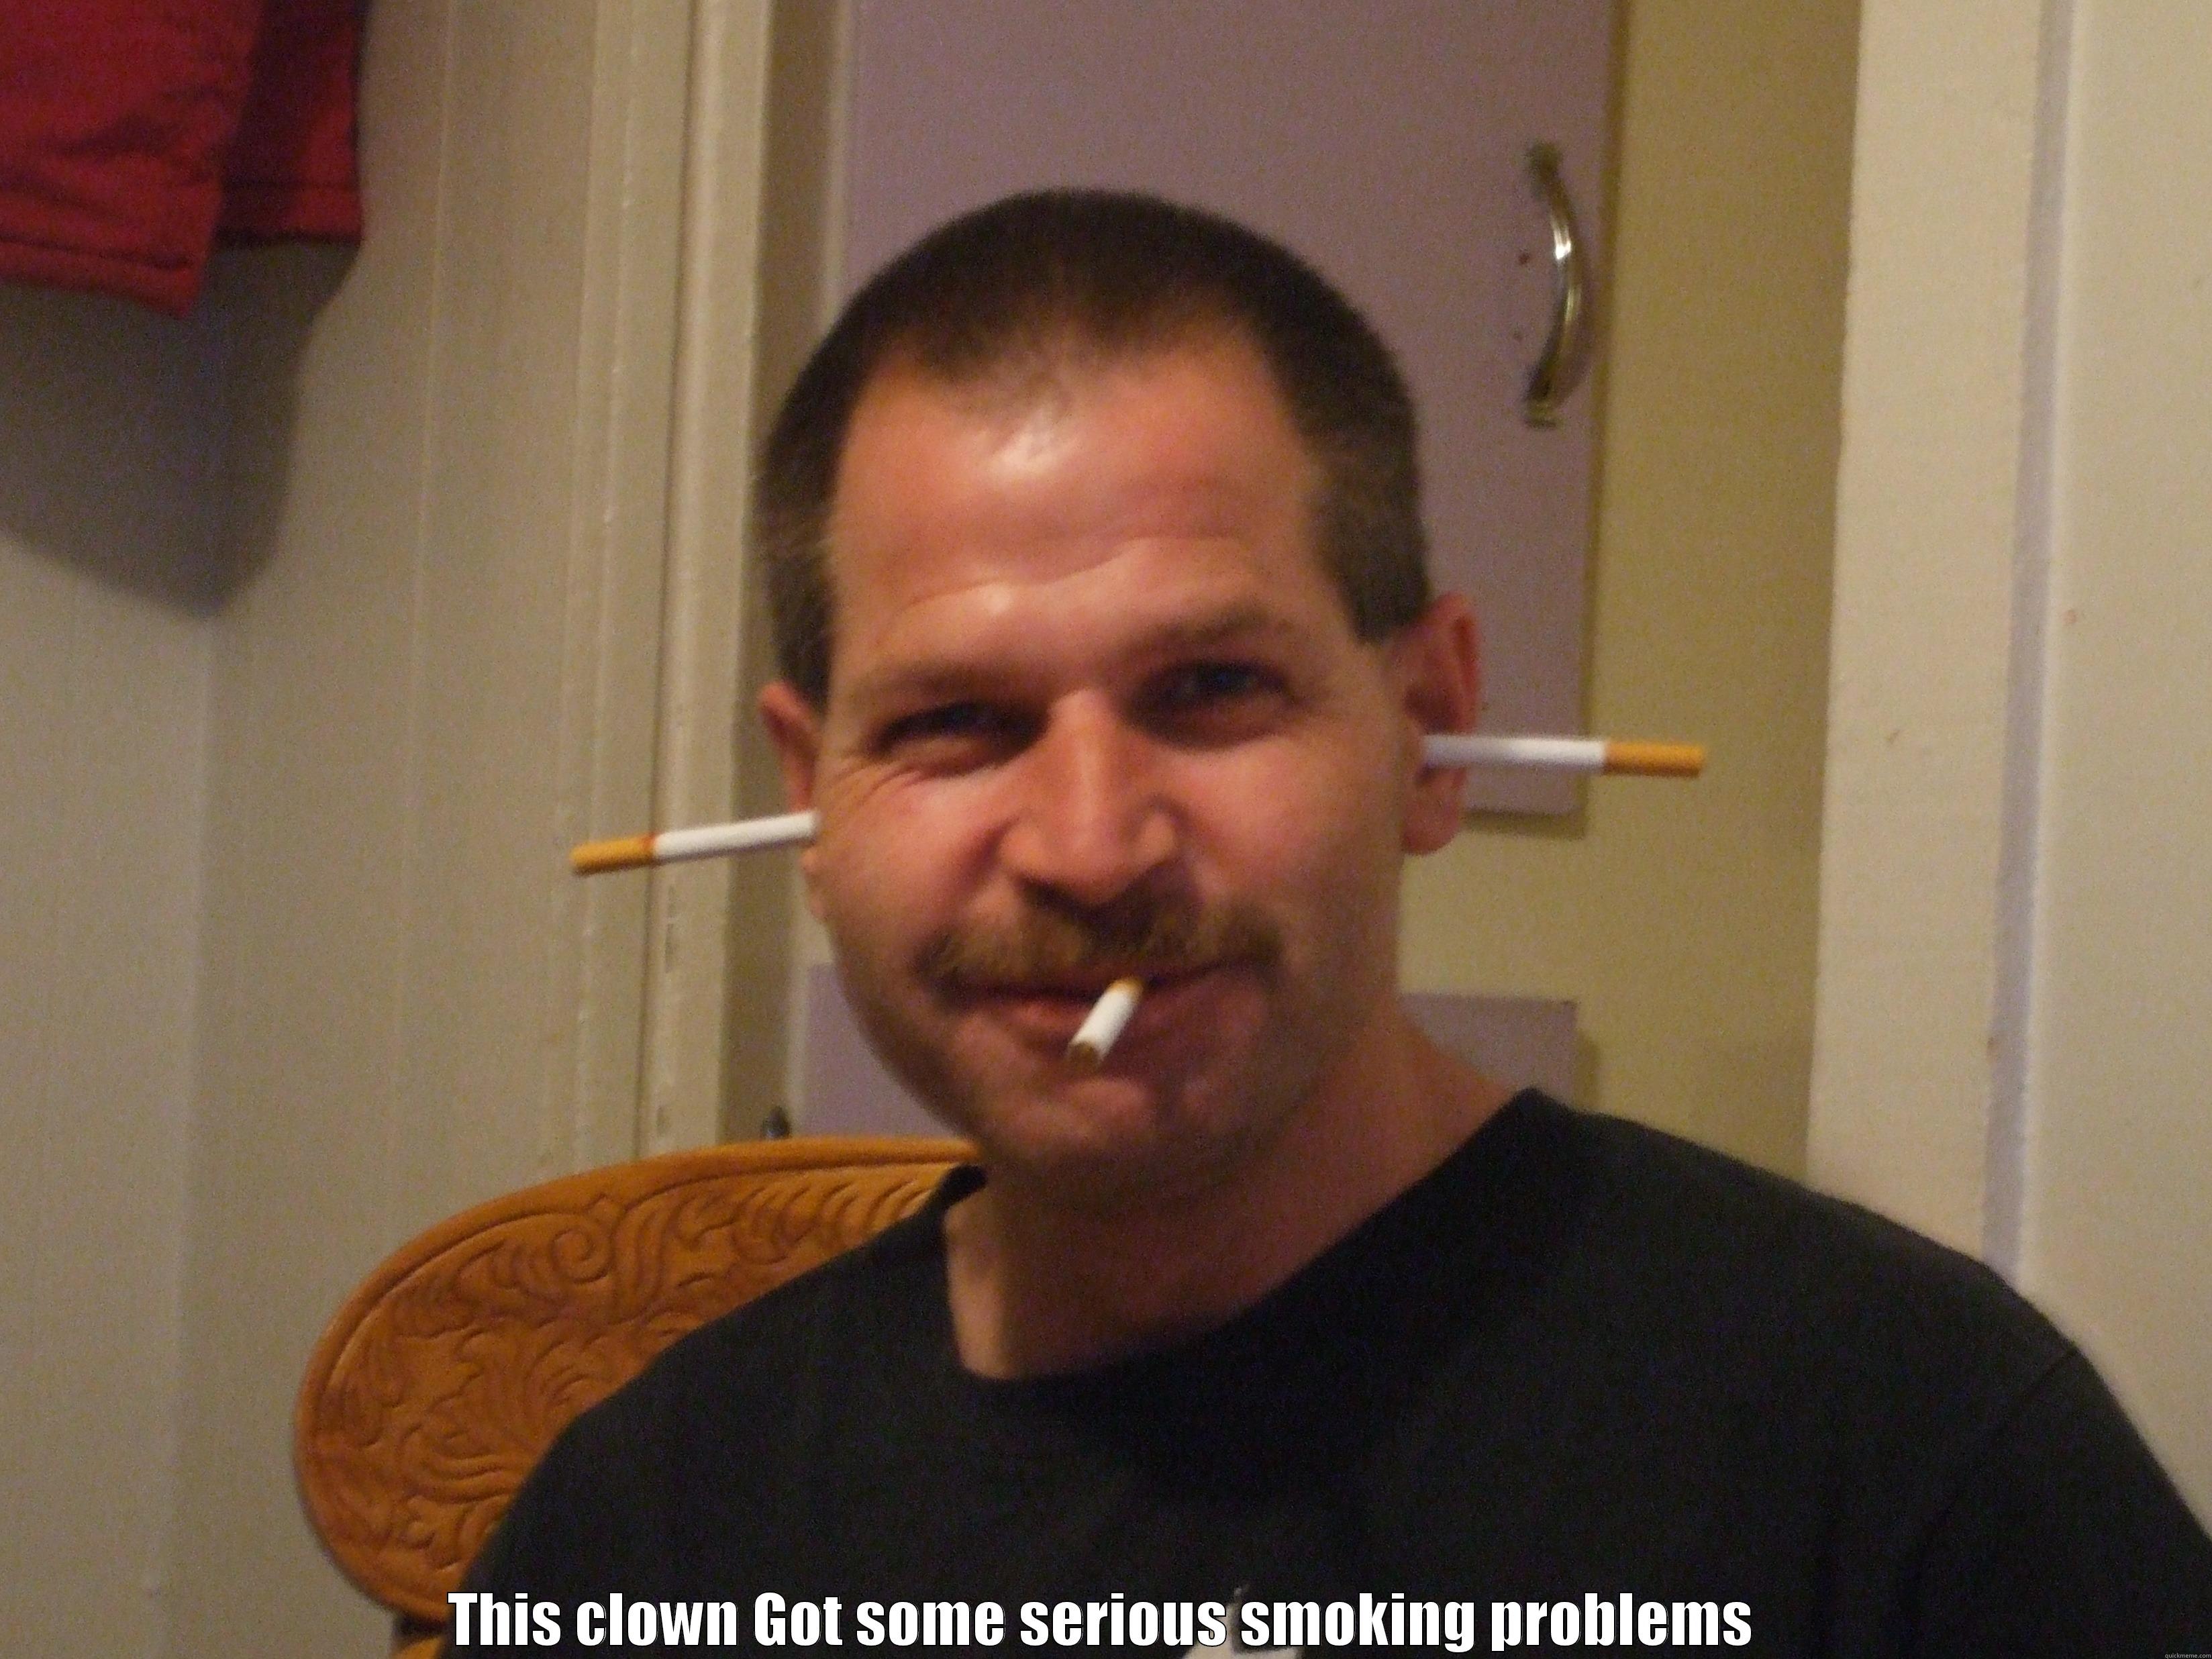  THIS CLOWN GOT SOME SERIOUS SMOKING PROBLEMS Misc